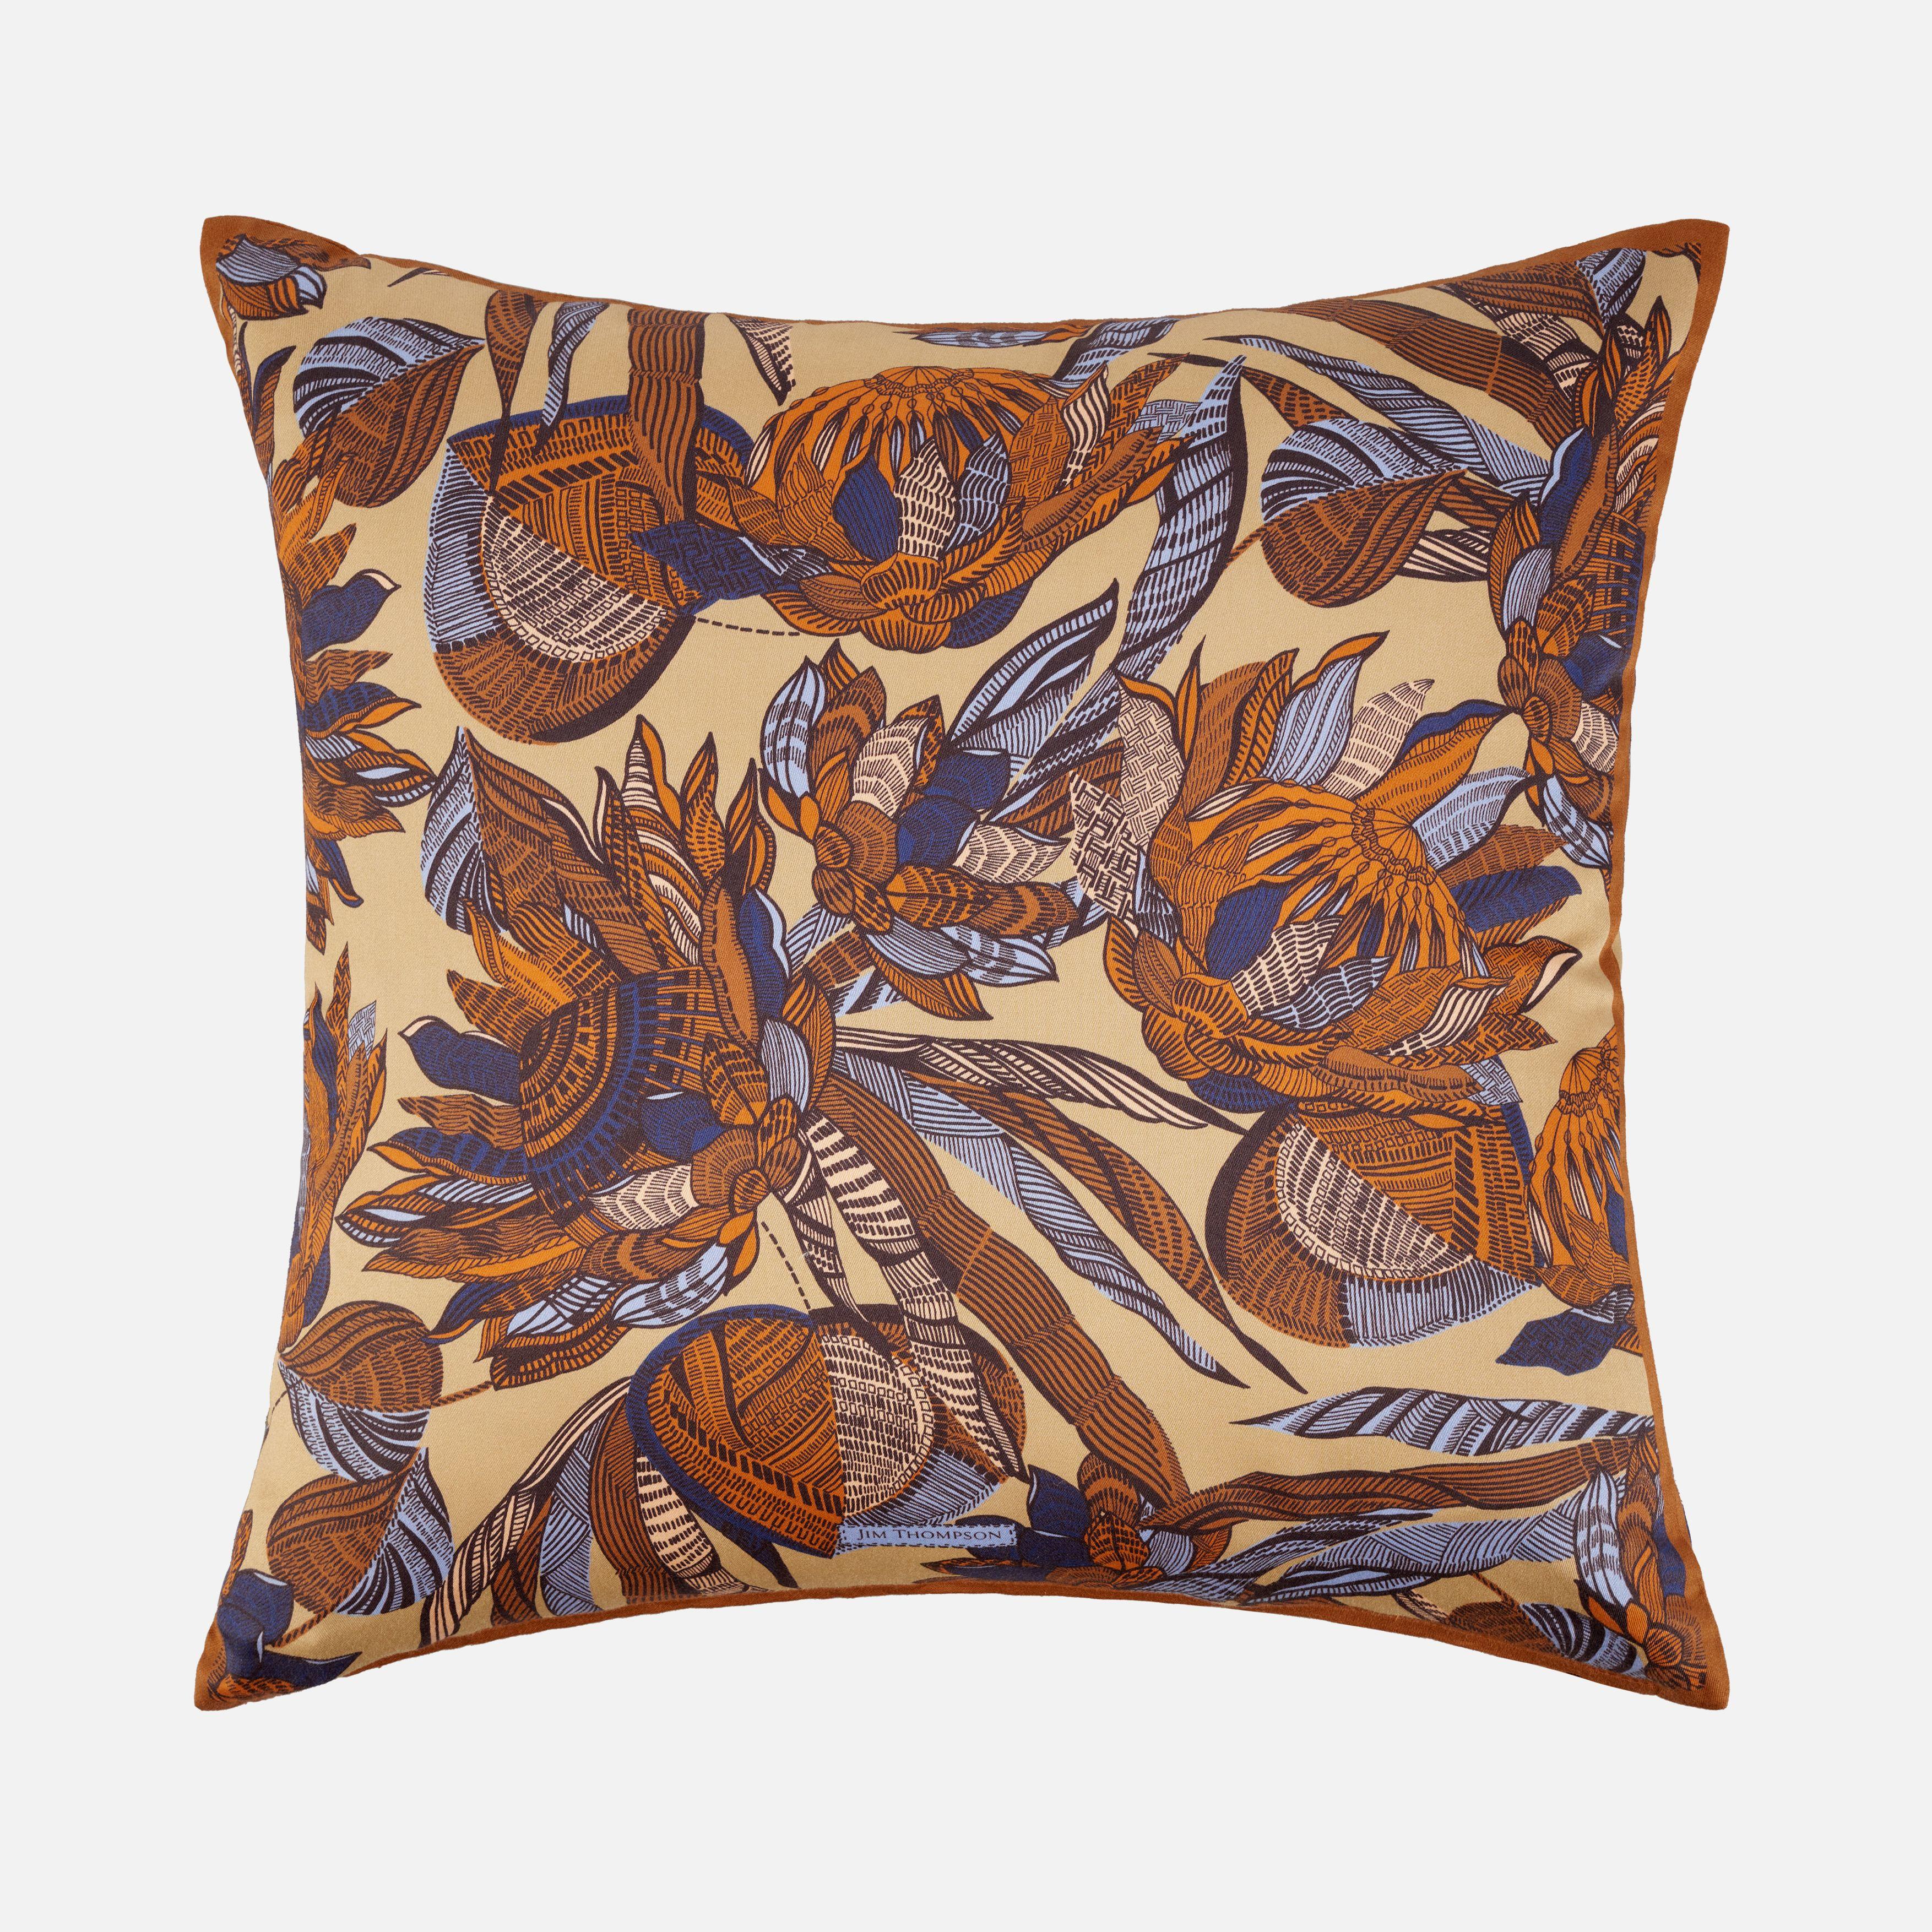 Bamboo Flower Cotton Printed Cushion Cover 18" - Brown